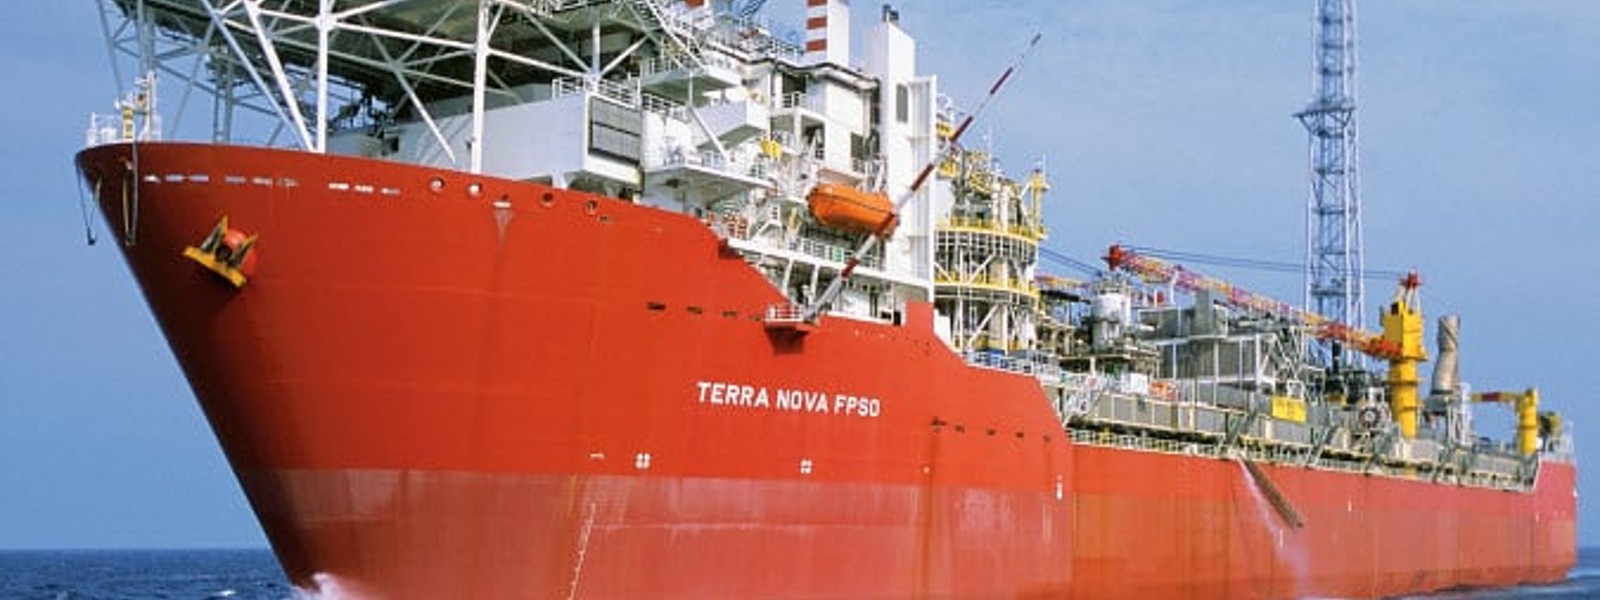 450,000 barrels of crude oil to be purchased from Terra Nova Group